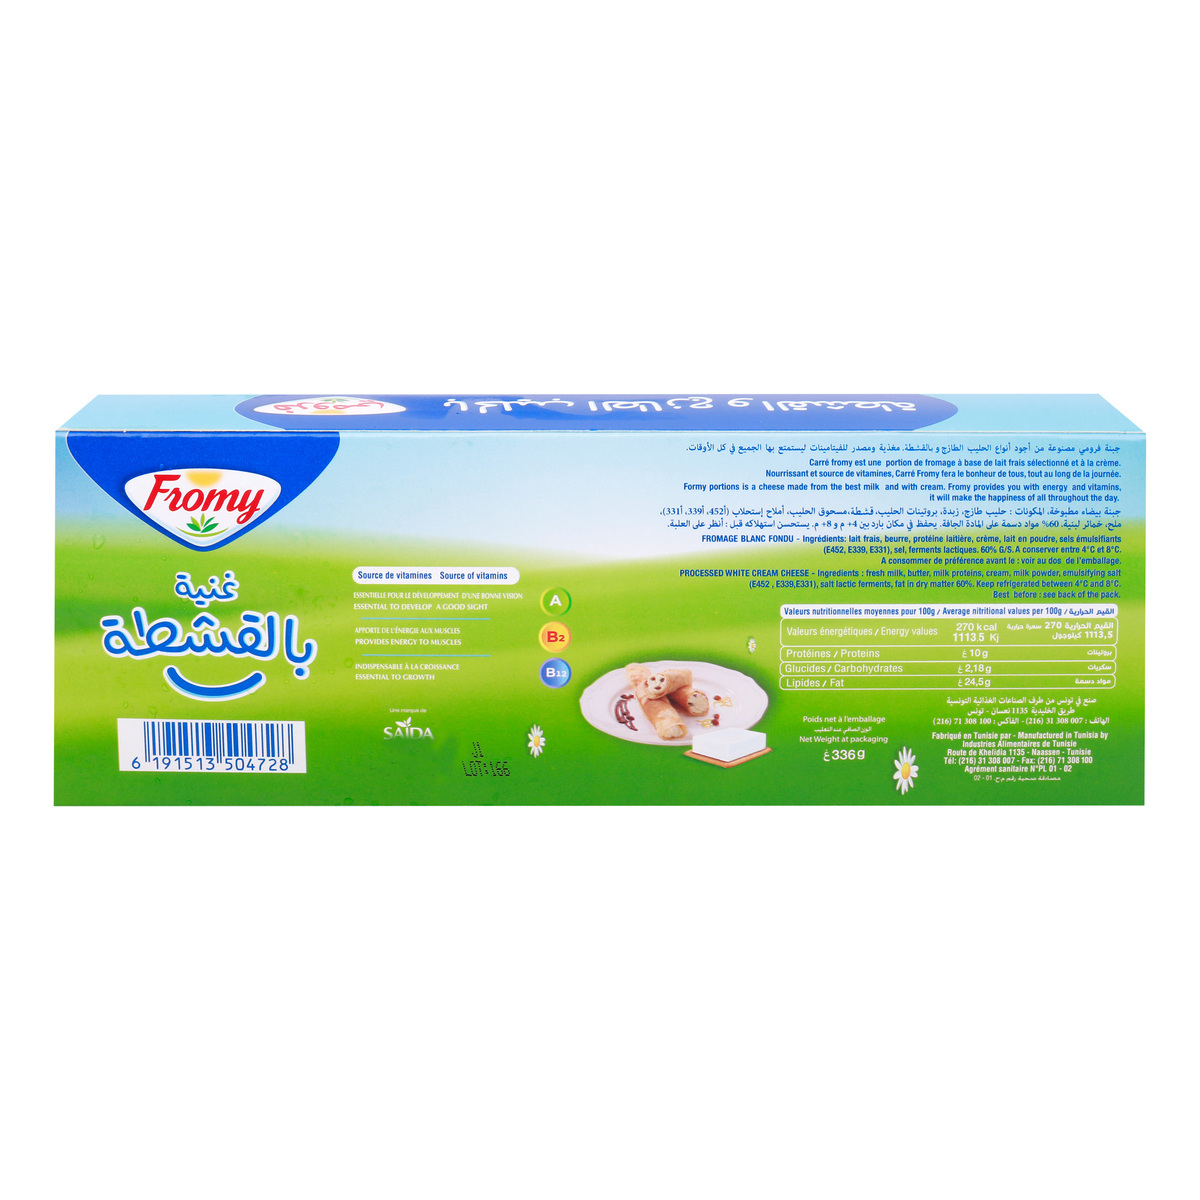 Fromy Processed White Cream Cheese 24 Portion 336 g